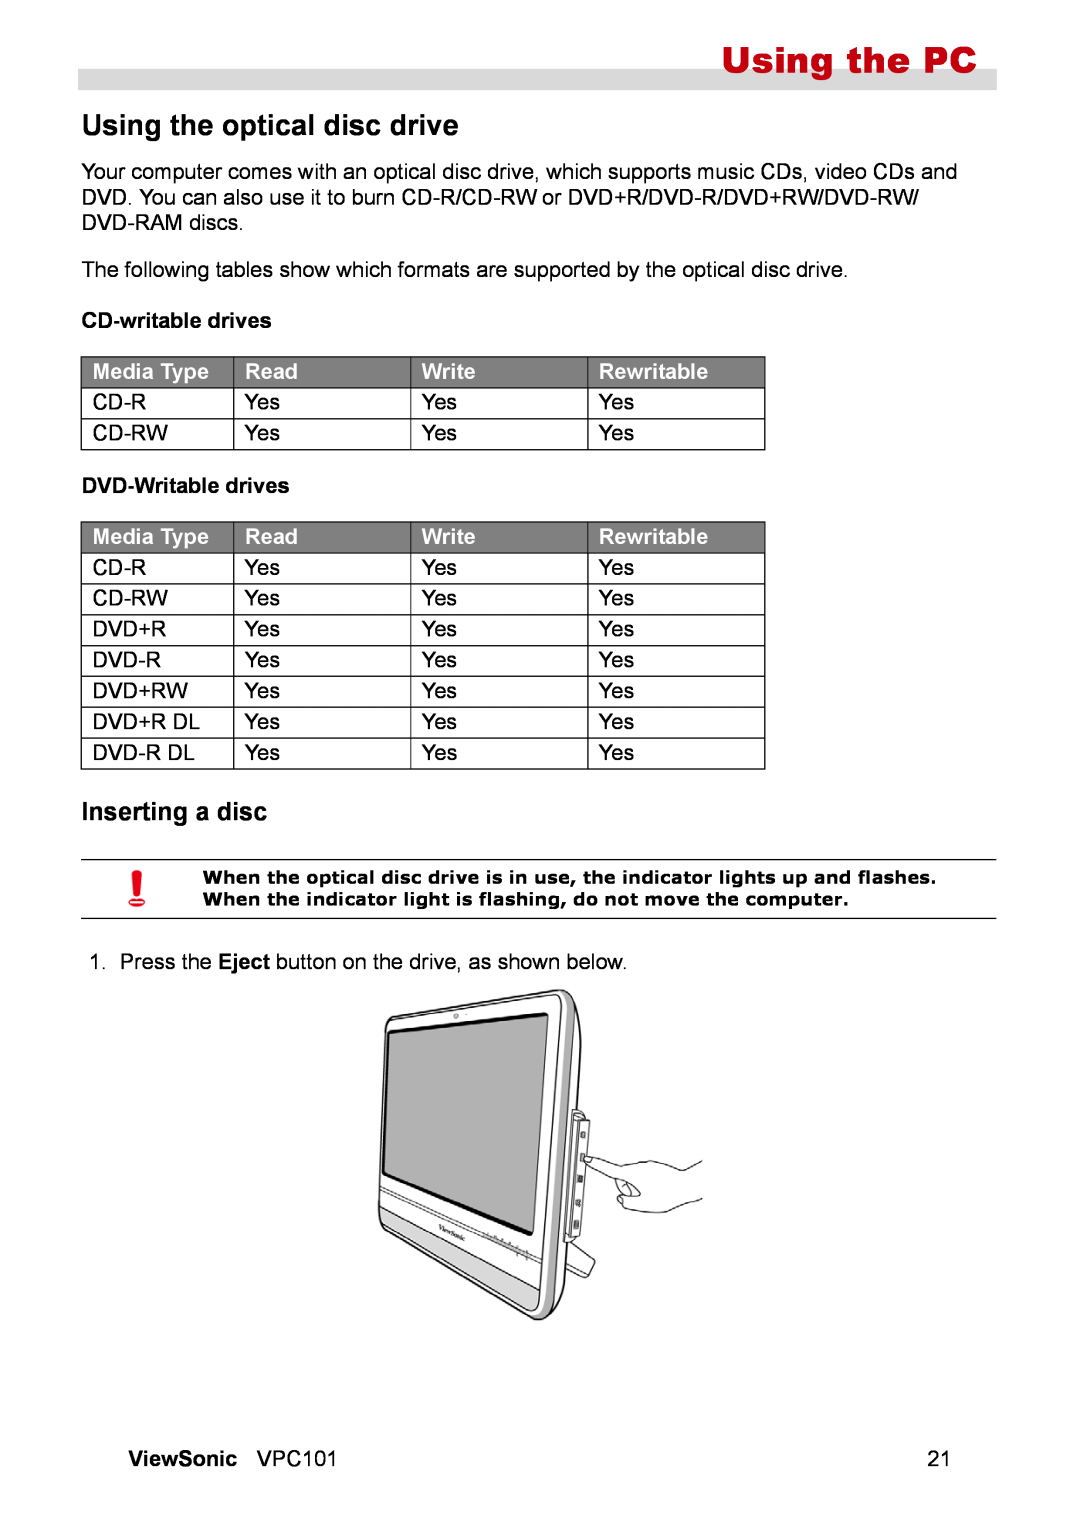 ViewSonic VS12602 manual Using the optical disc drive, Inserting a disc, Media Type, Read, Write, Rewritable, Using the PC 